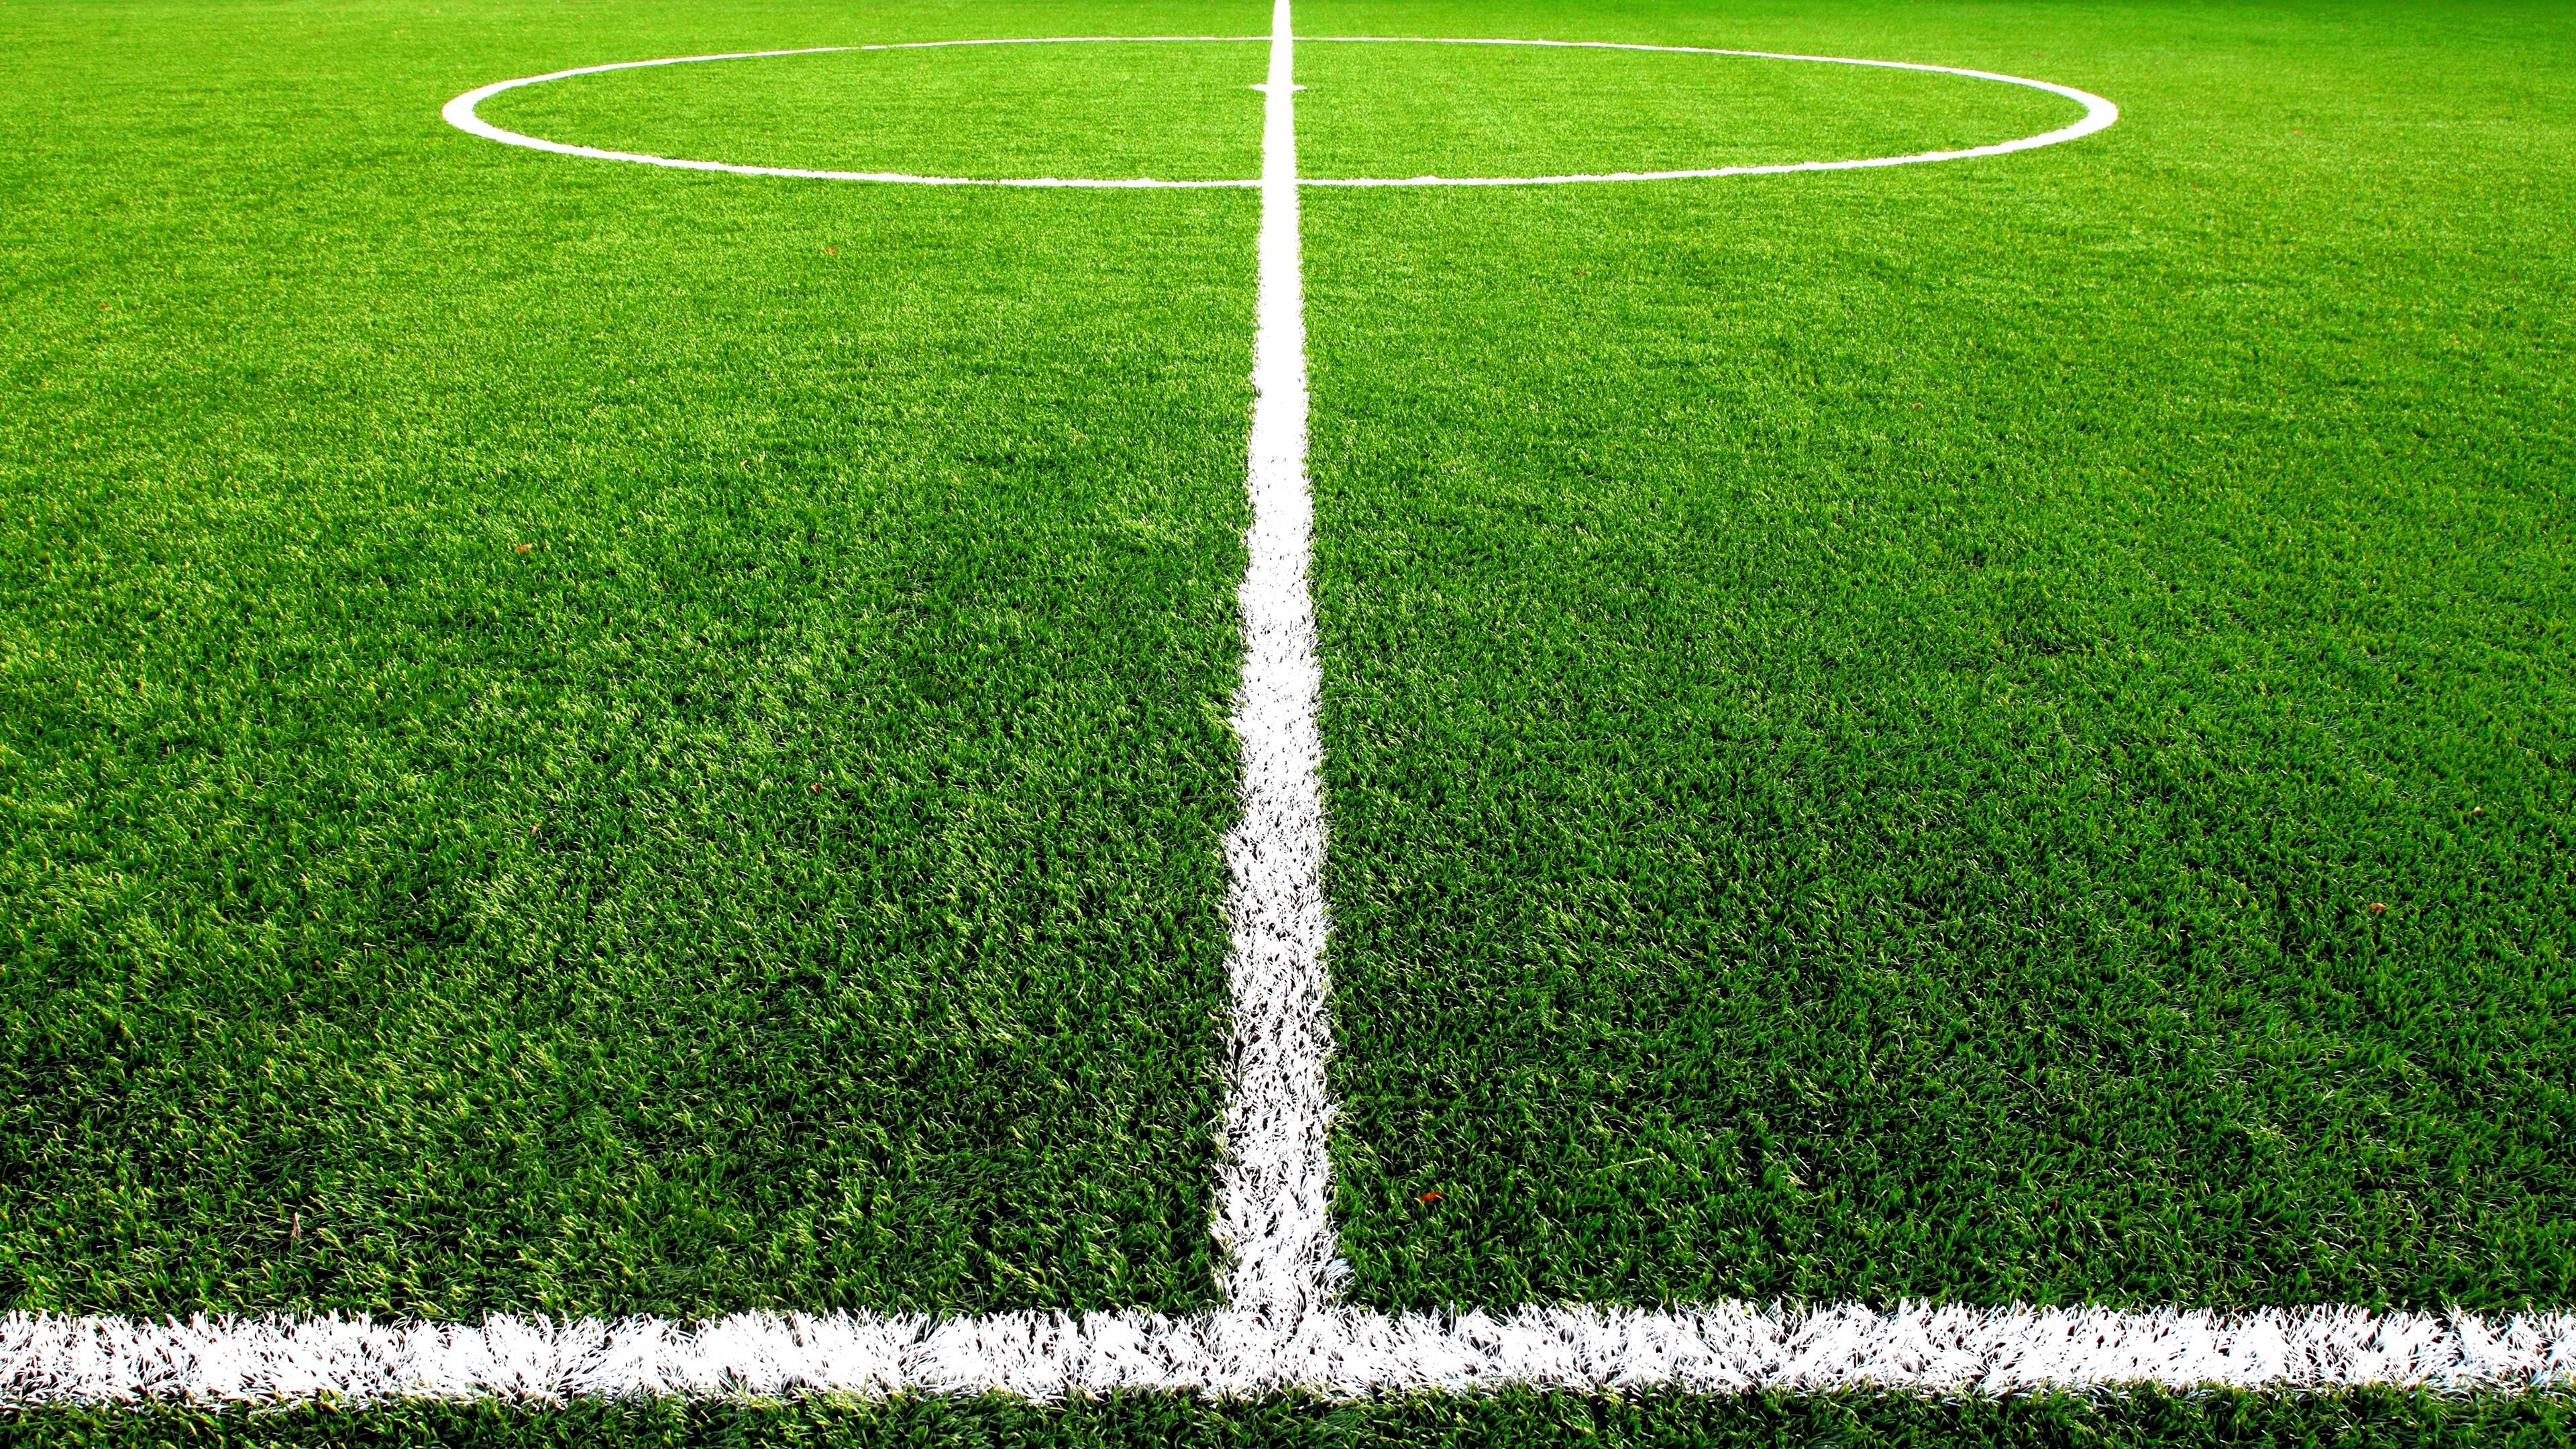 3840x2160, Artificial Grass With White Lines For Football - Football Grass Hd , HD Wallpaper & Backgrounds